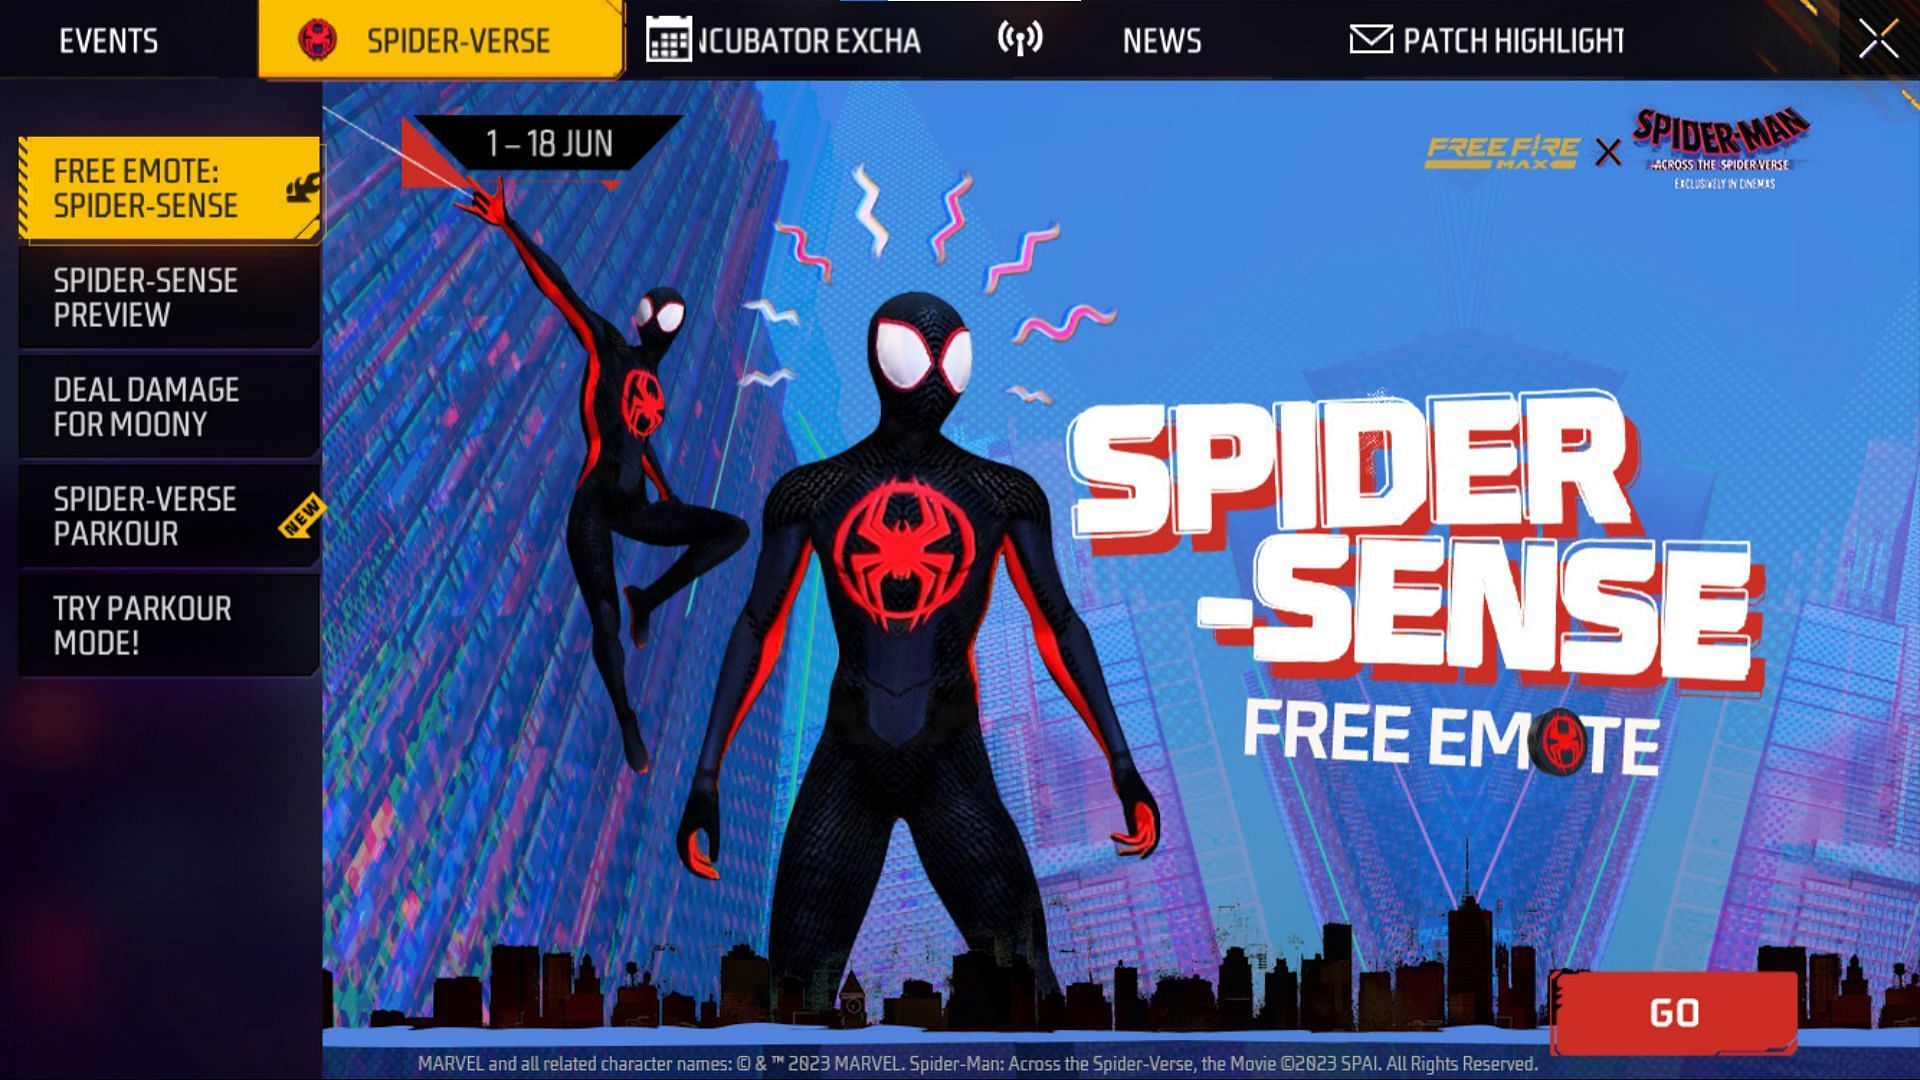 Spider-Sense emote is one of the most attractive free rewards available to players (Image via Garena)